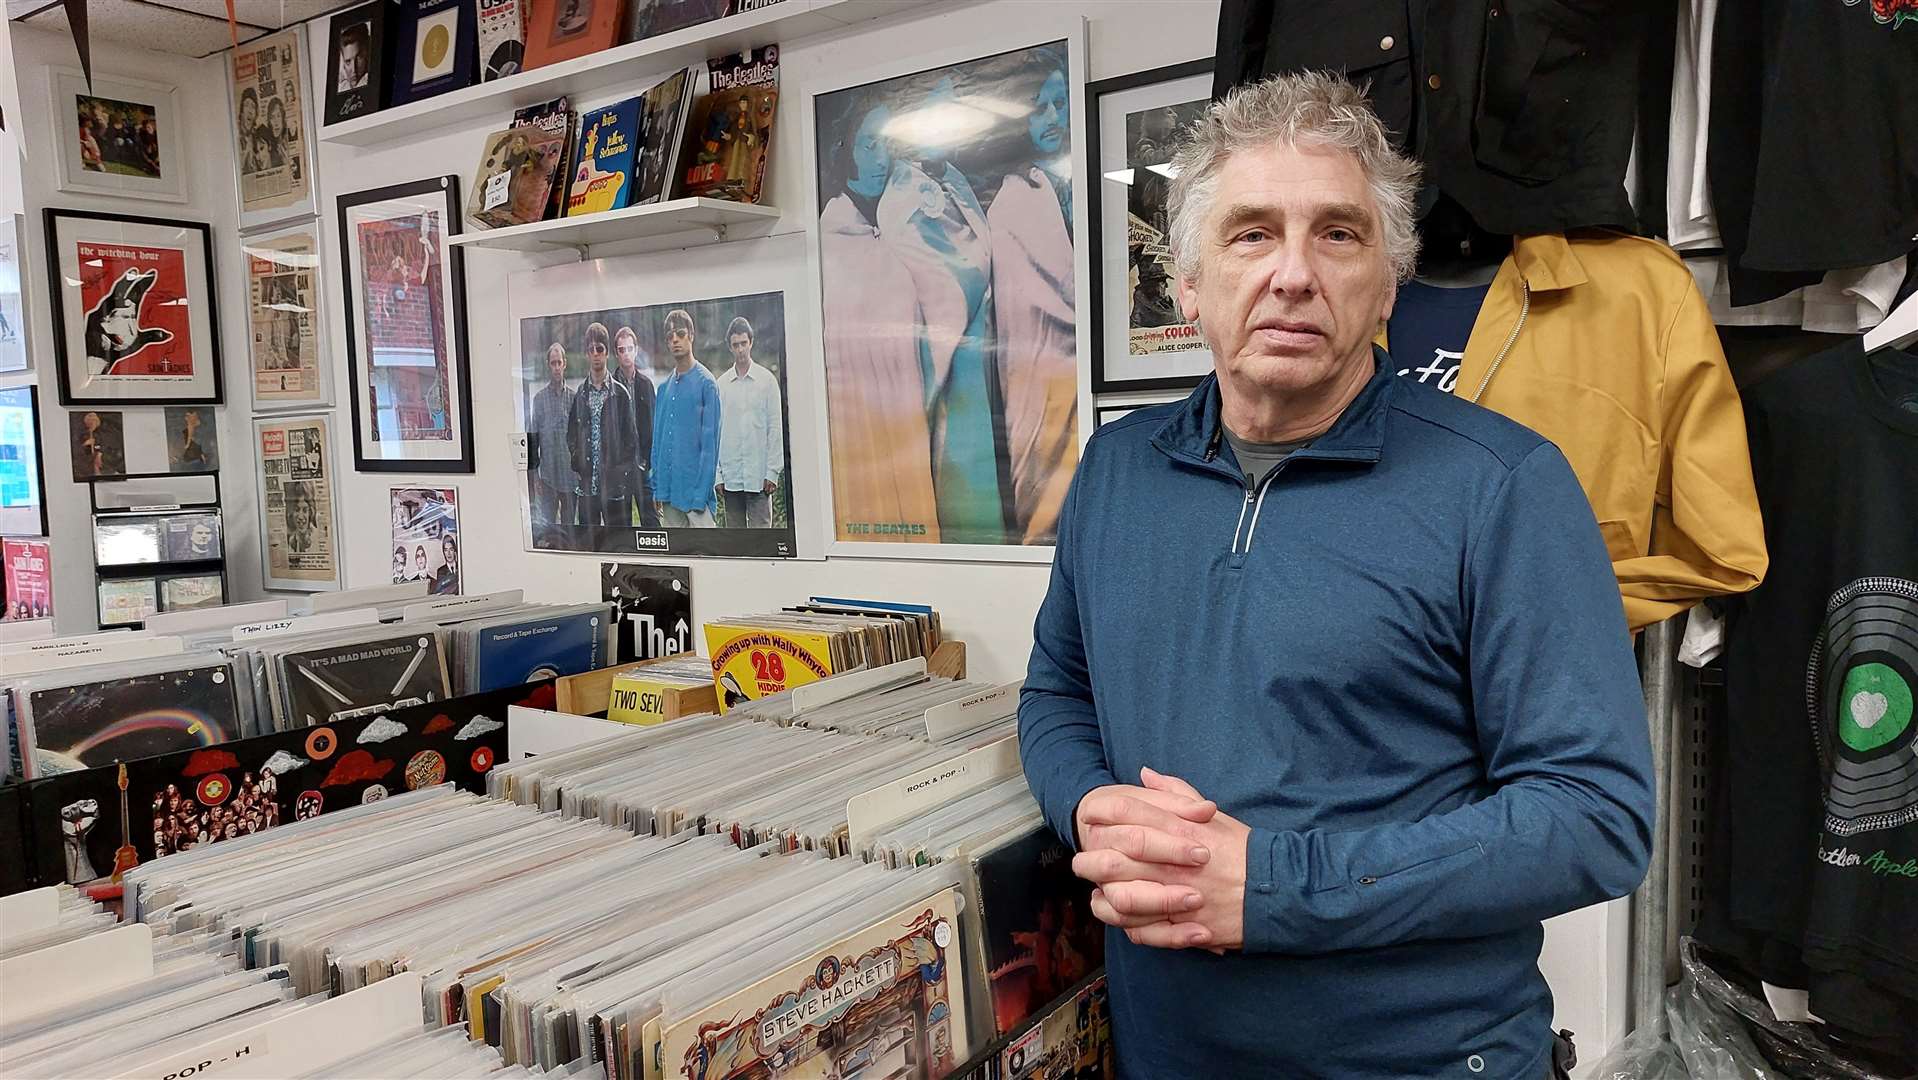 Vince Monticelli, owner of The Record Store